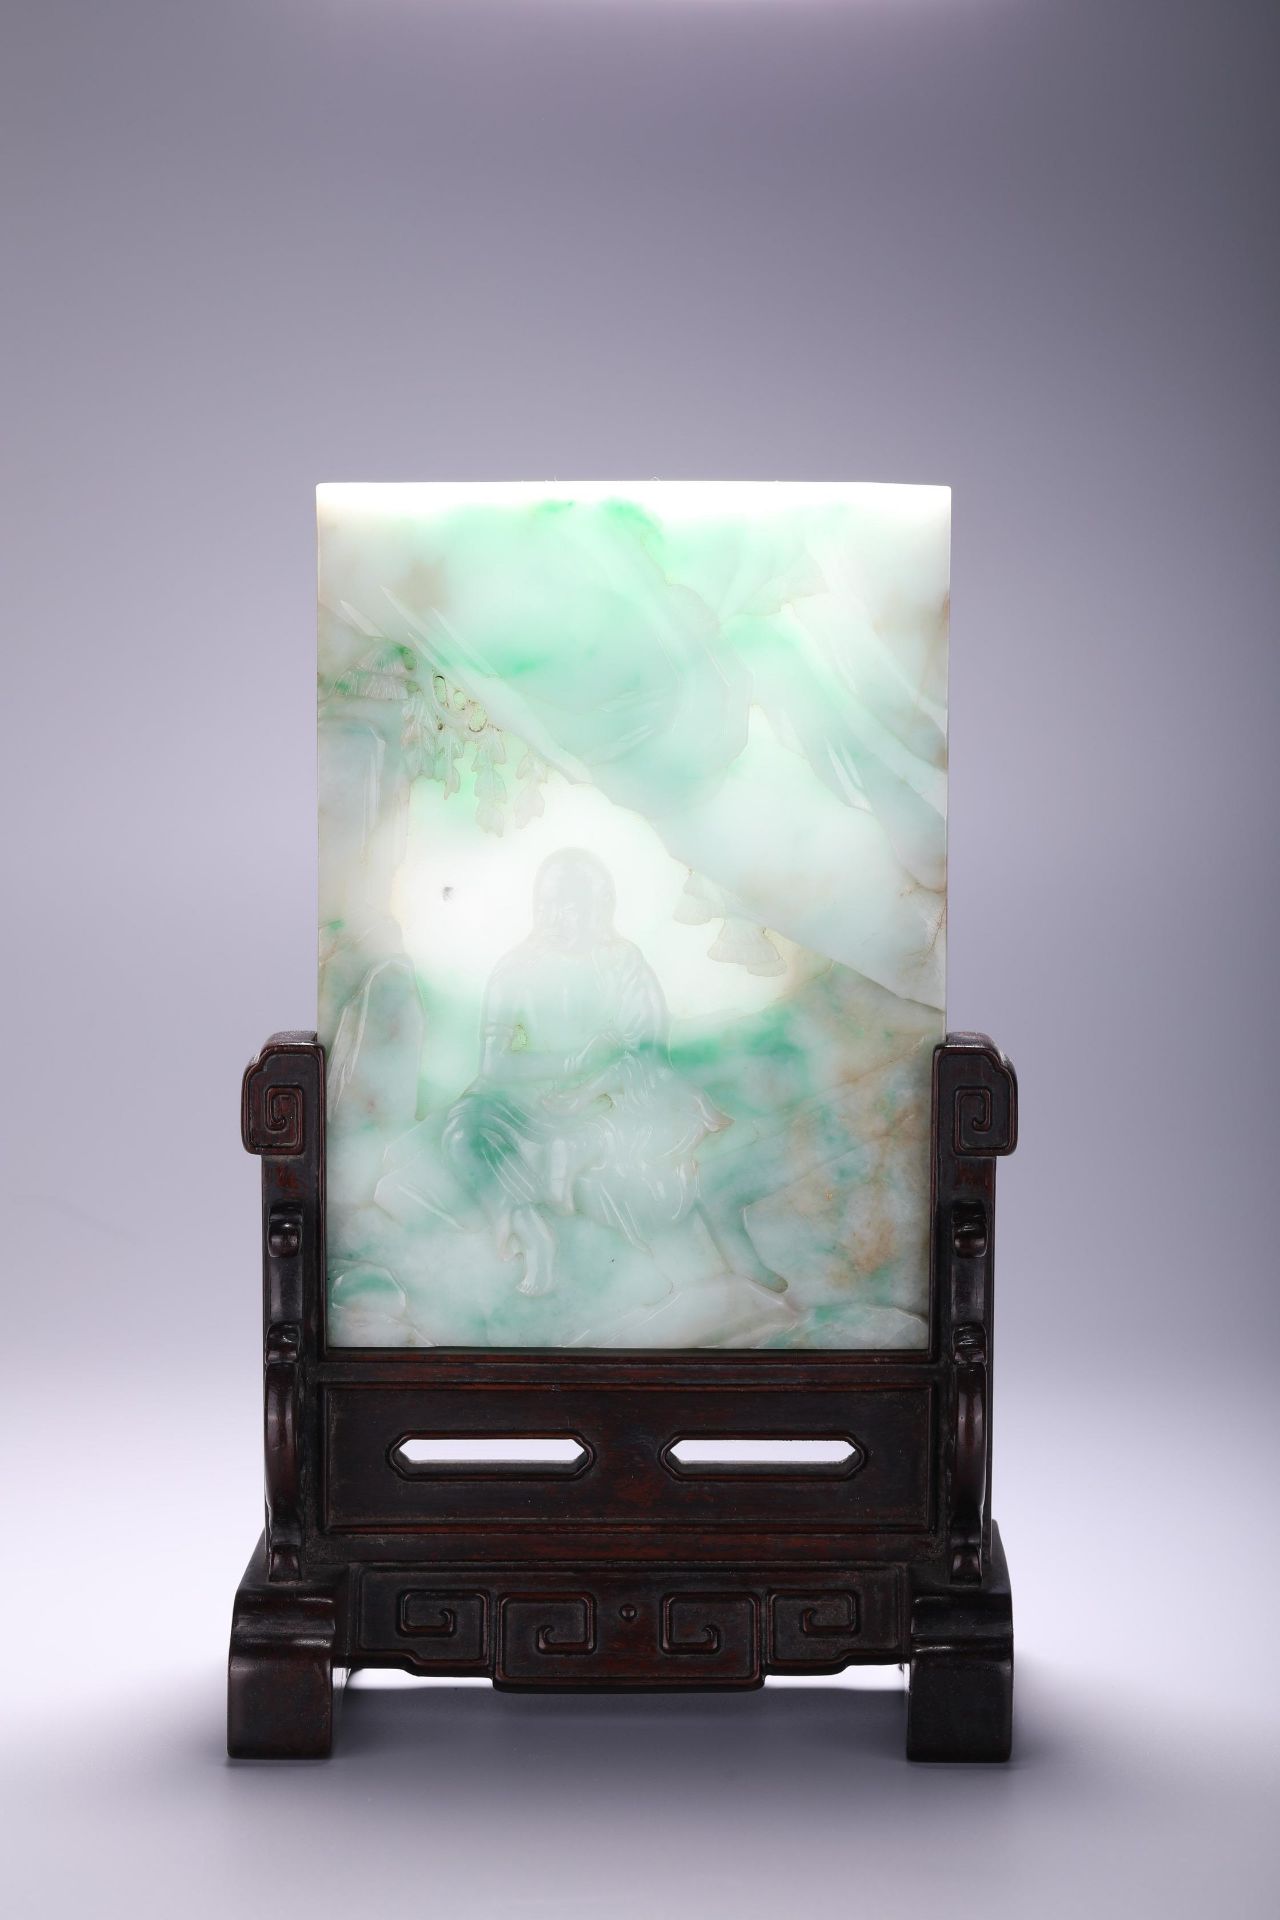 A Chinese carved jadeite feicui jade plaque fitted in a wooden stand, L 16 - W 11,9 - Depth 1 cm - Bild 2 aus 6